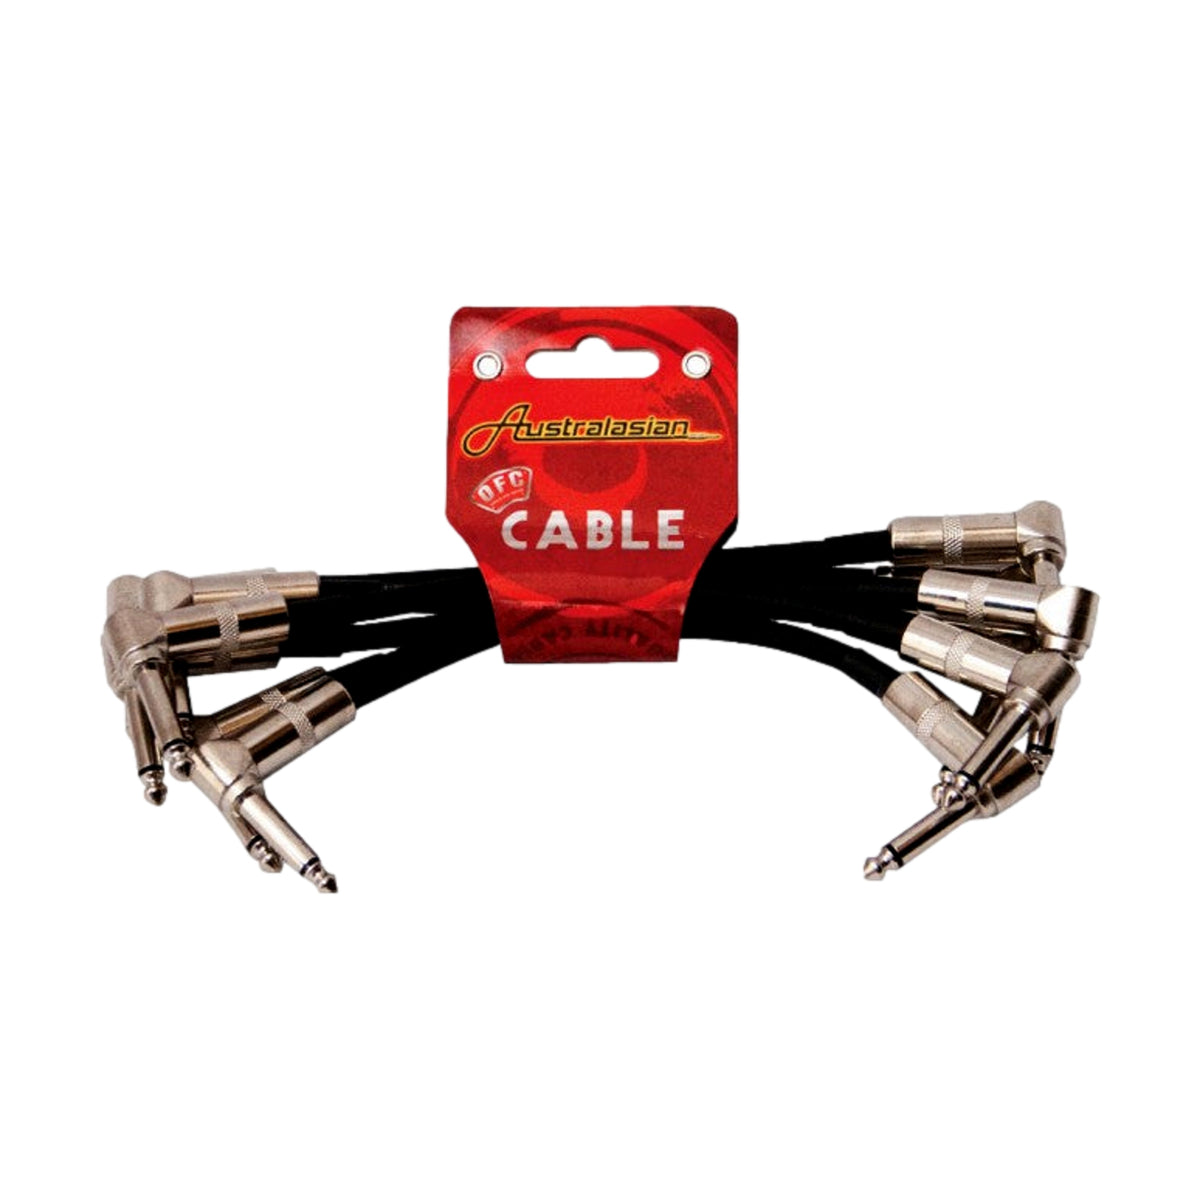 Australasian 6x Right Angle 6 Inch 6.3mm Patch Cables